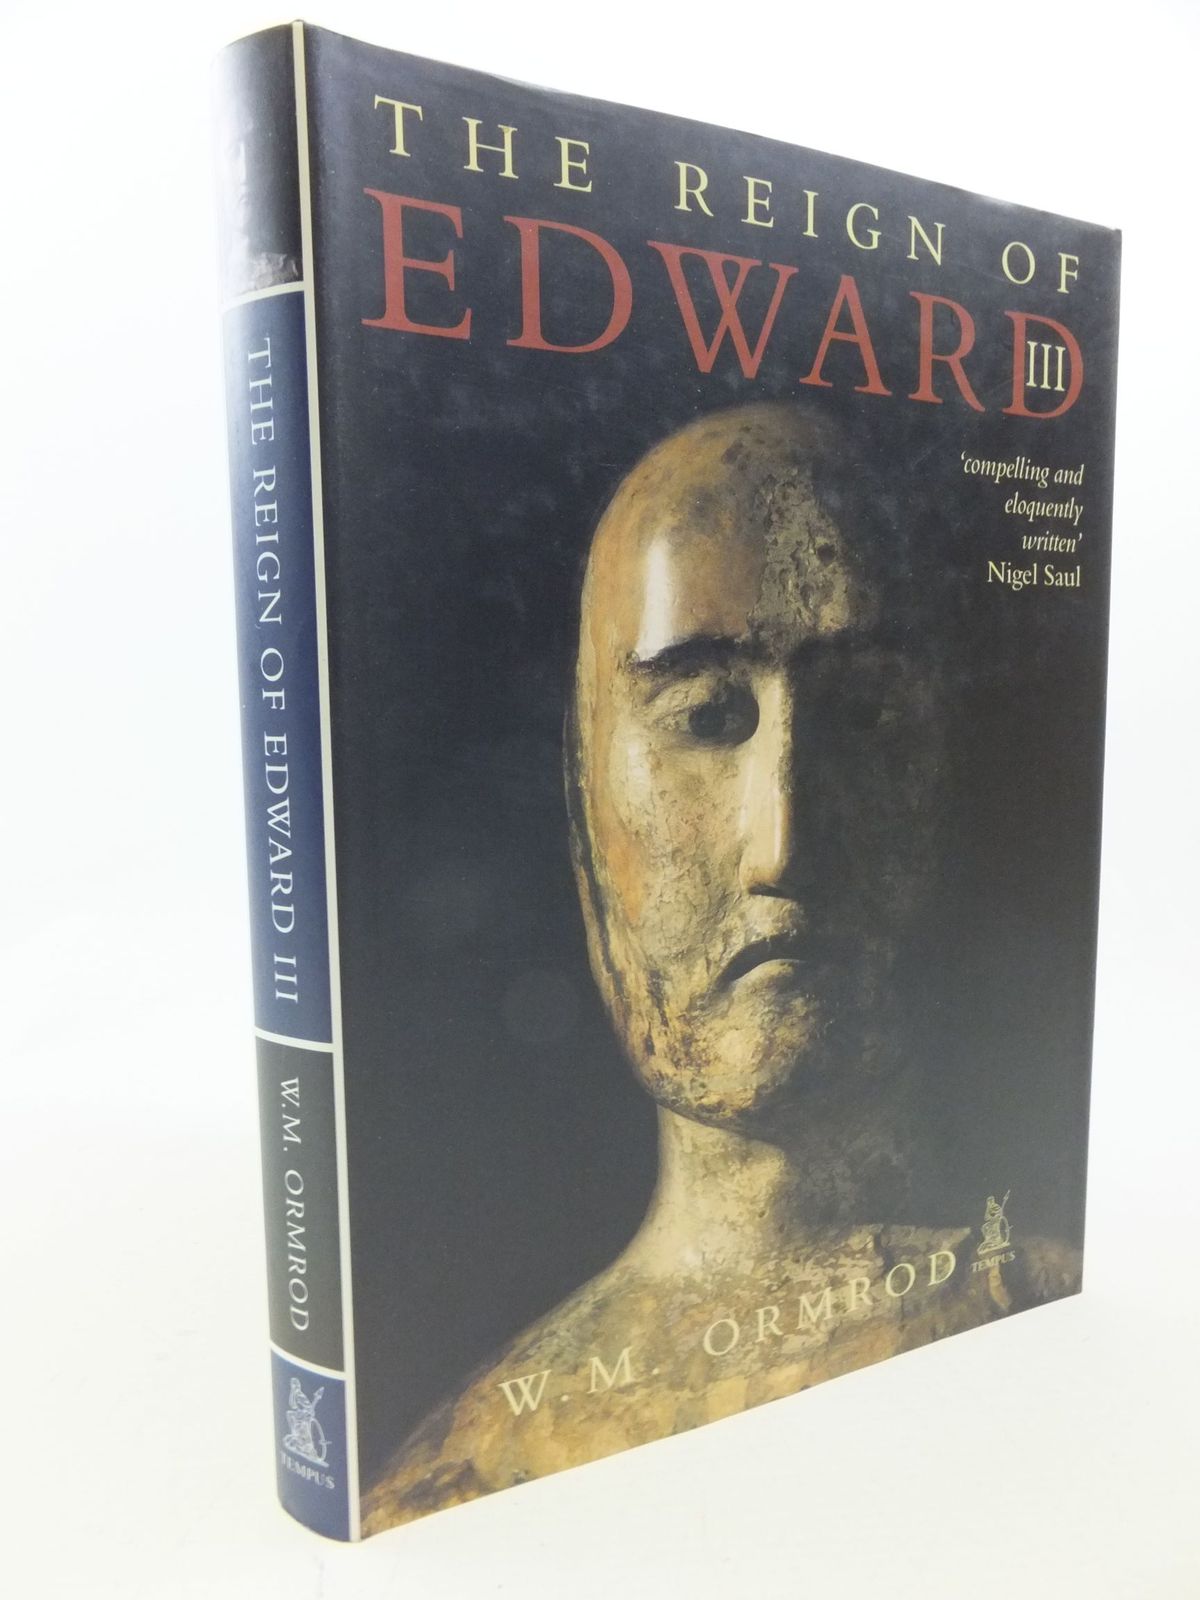 Photo of THE REIGN OF EDWARD III written by Ormrod, W.M. published by Tempus Publishing Ltd (STOCK CODE: 2114068)  for sale by Stella & Rose's Books